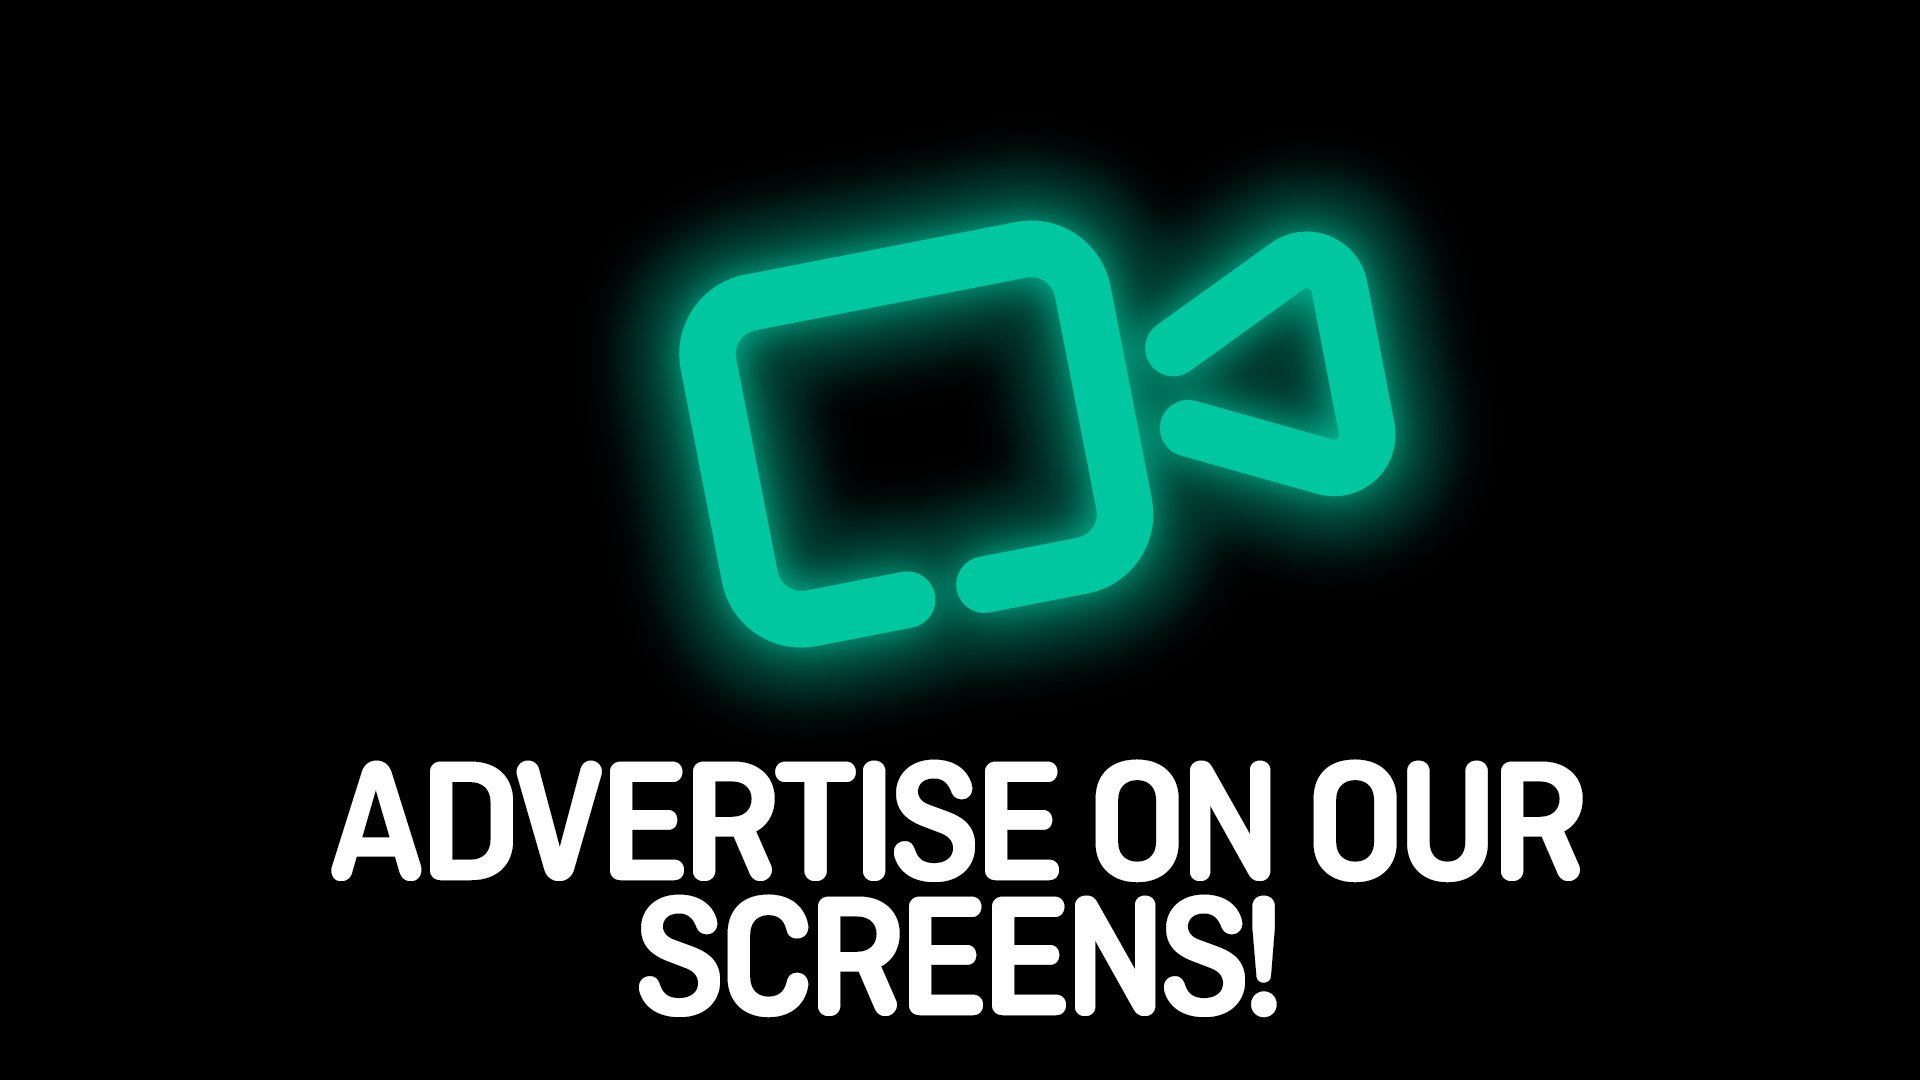 Advertise on our screens